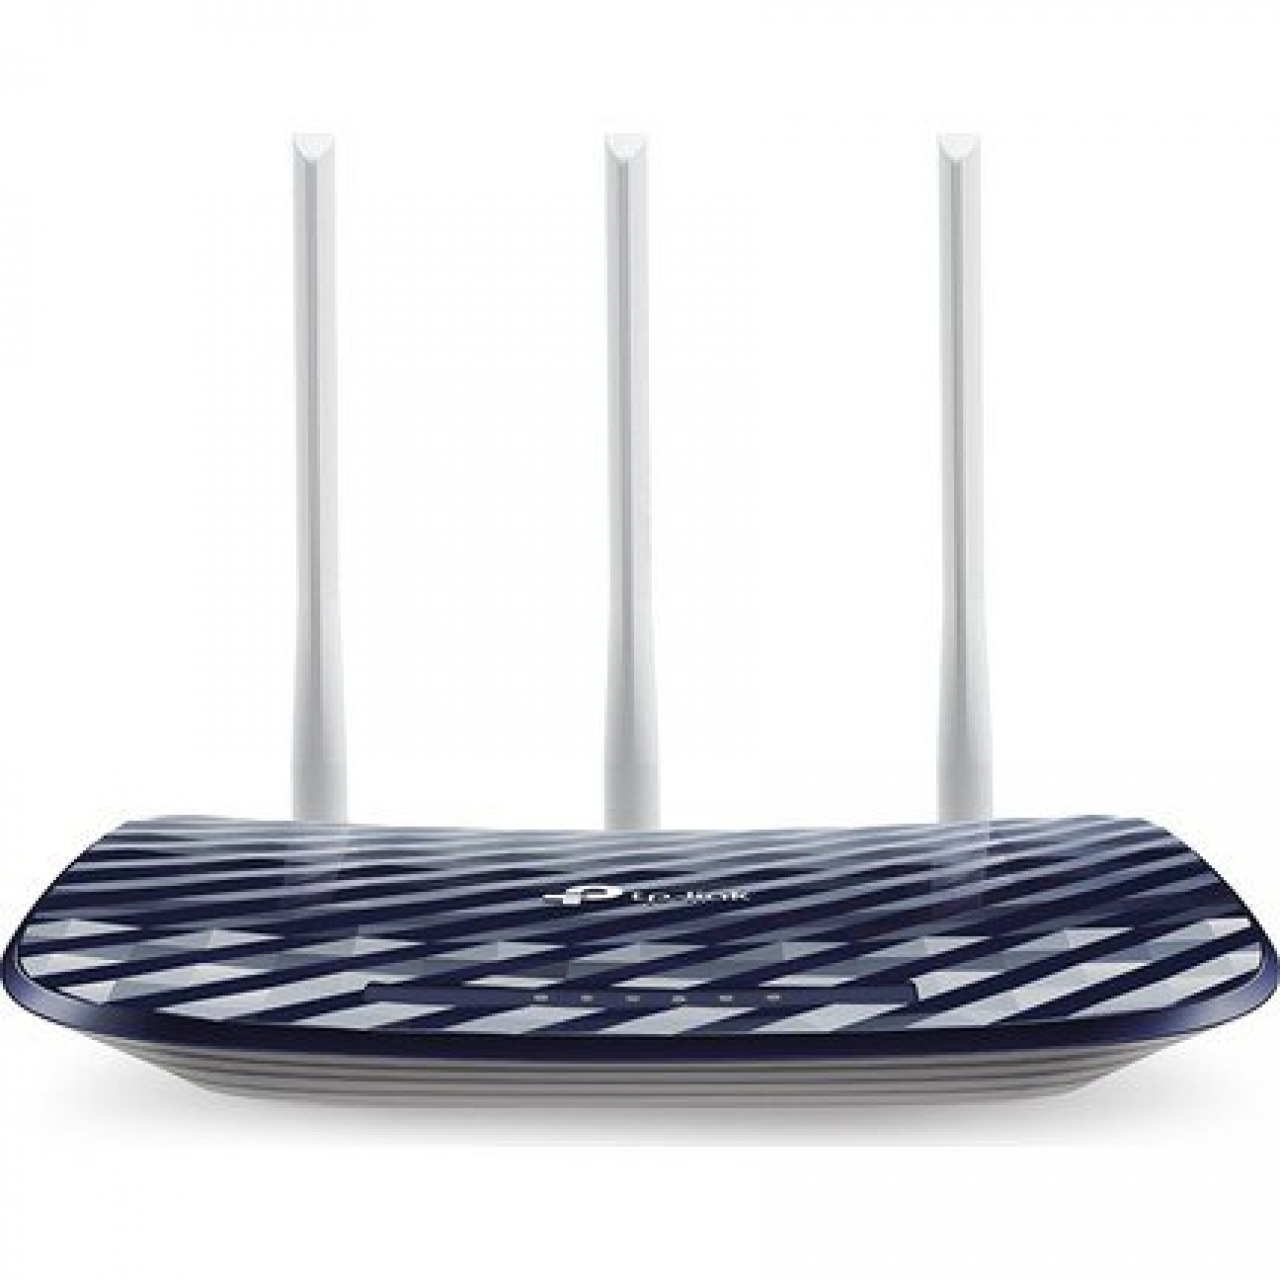 TP-LINK AC750 733MBPS DUAL BAND ROUTER